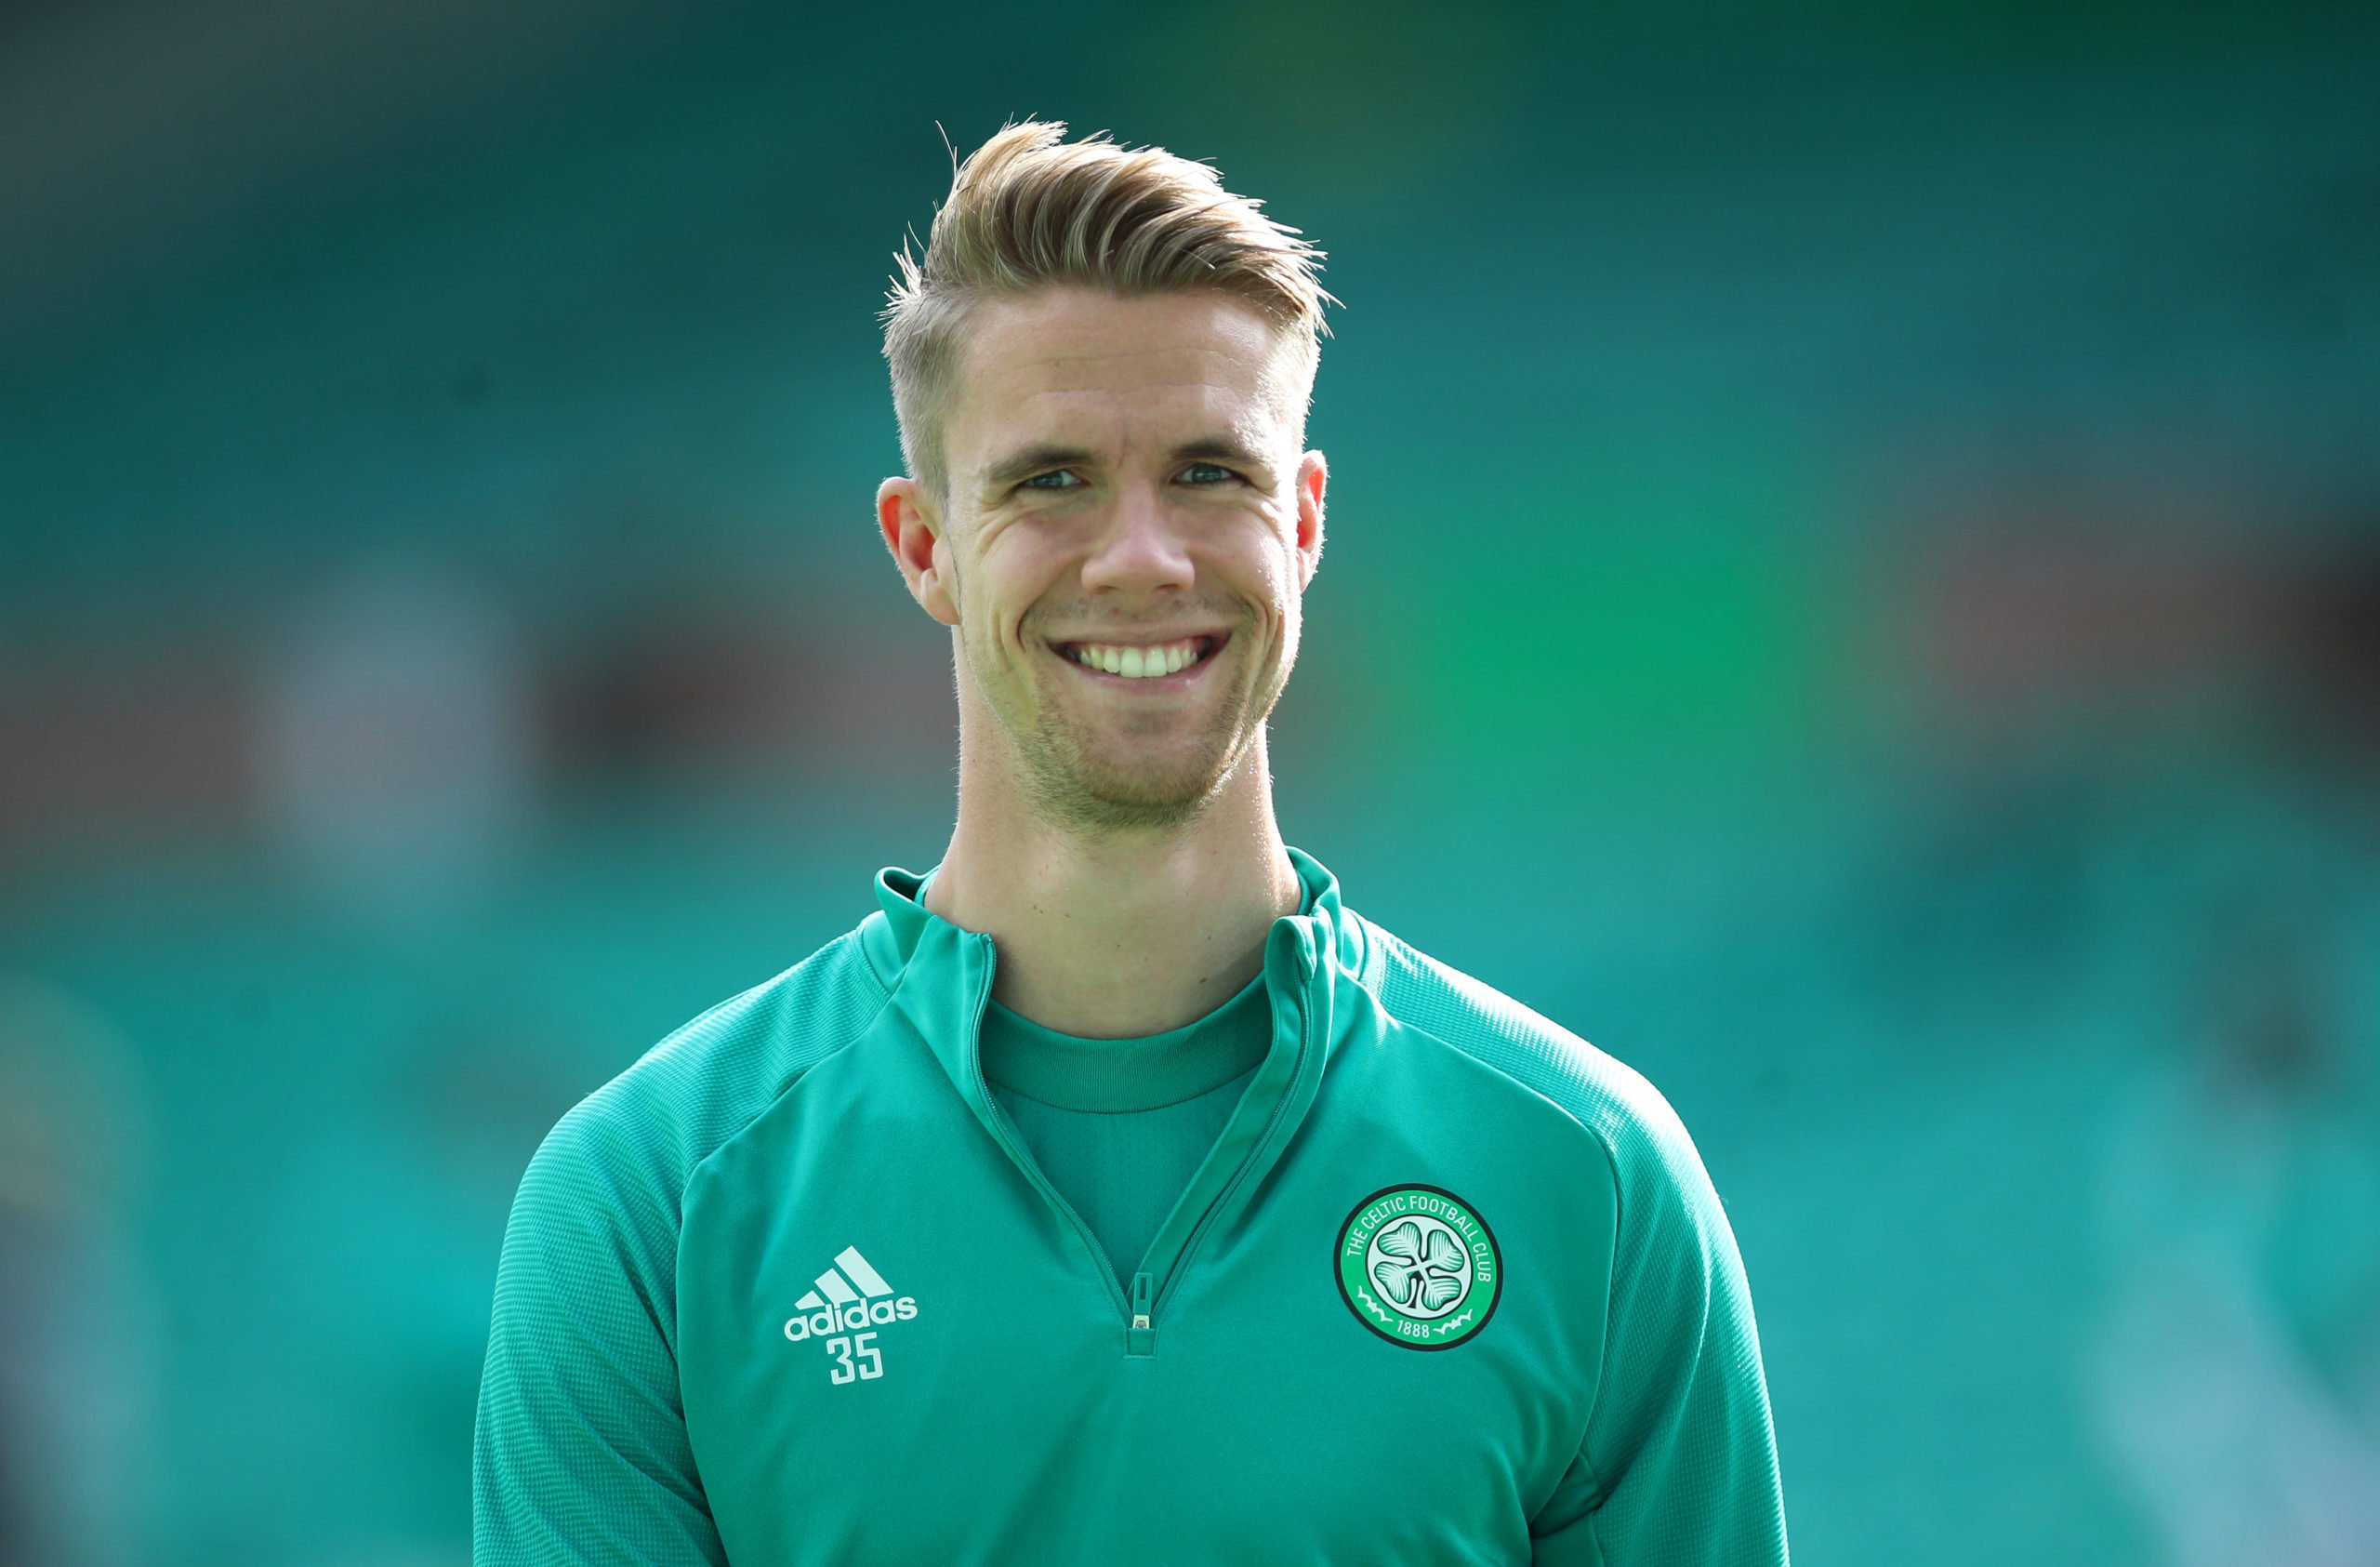 "Lifetime contract", "Thank you admin"; Celtic fans loving Kristoffer Ajer content